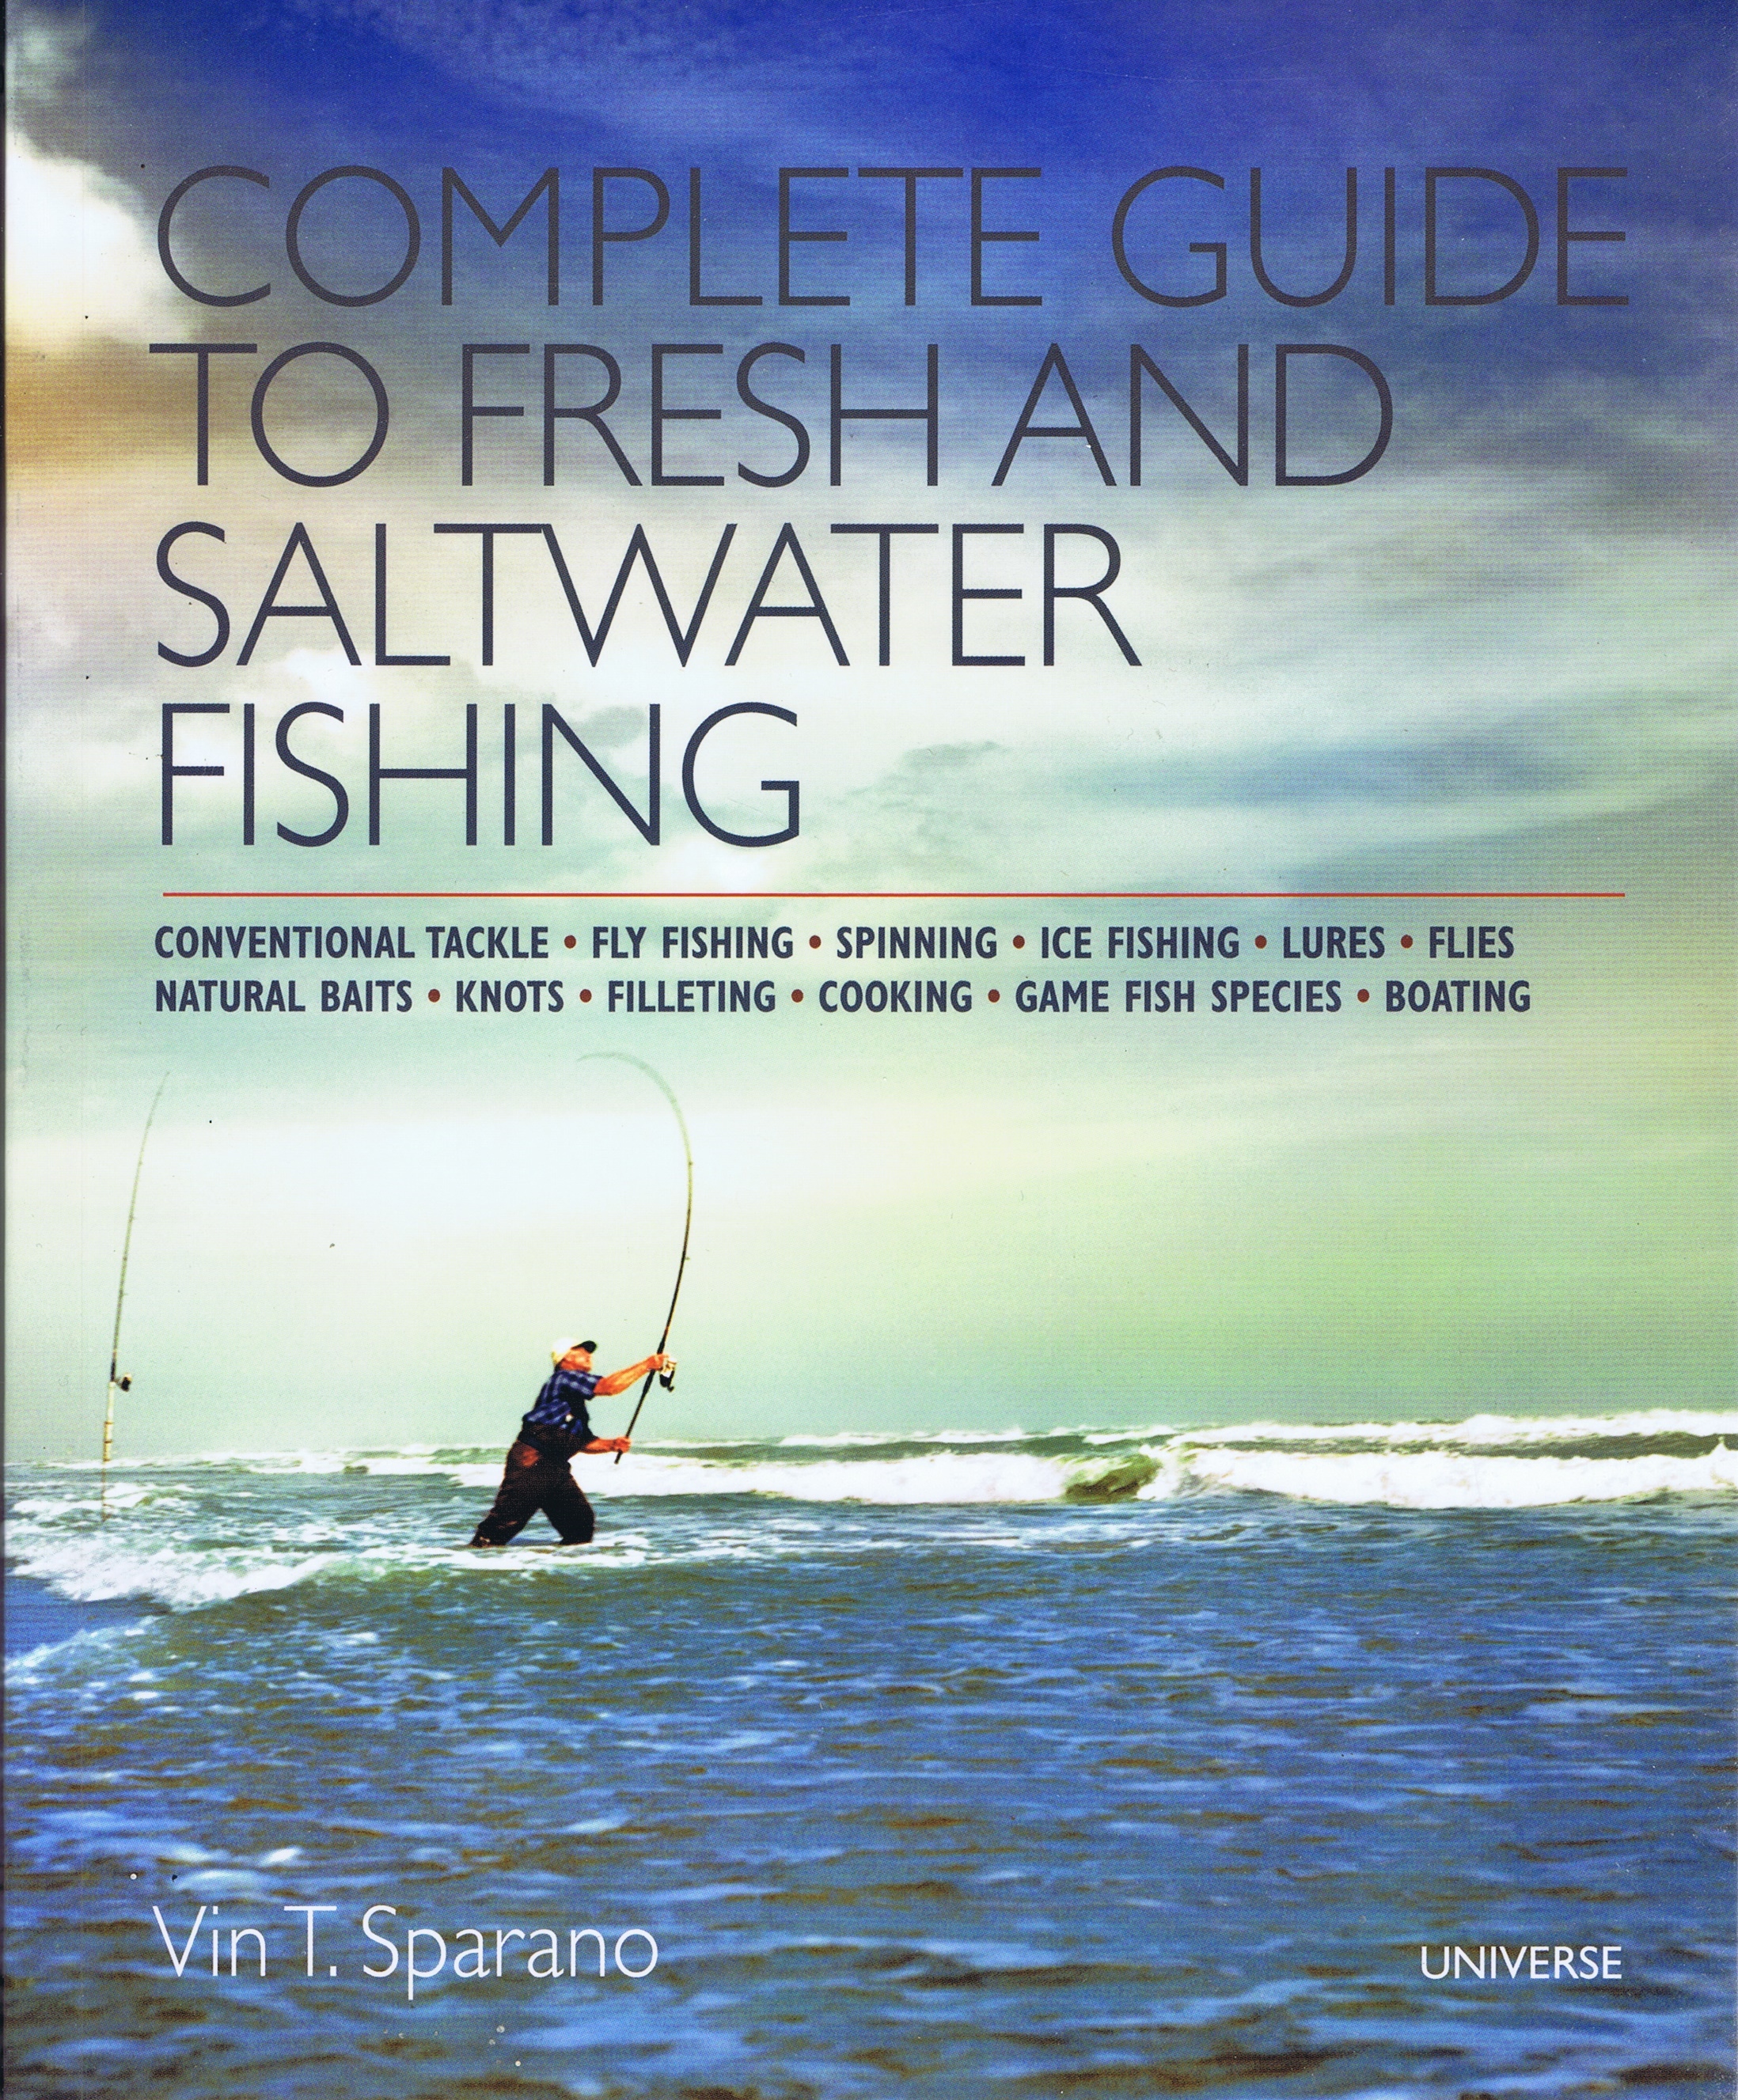 Complete Guide to Fresh and Saltwater Fishing